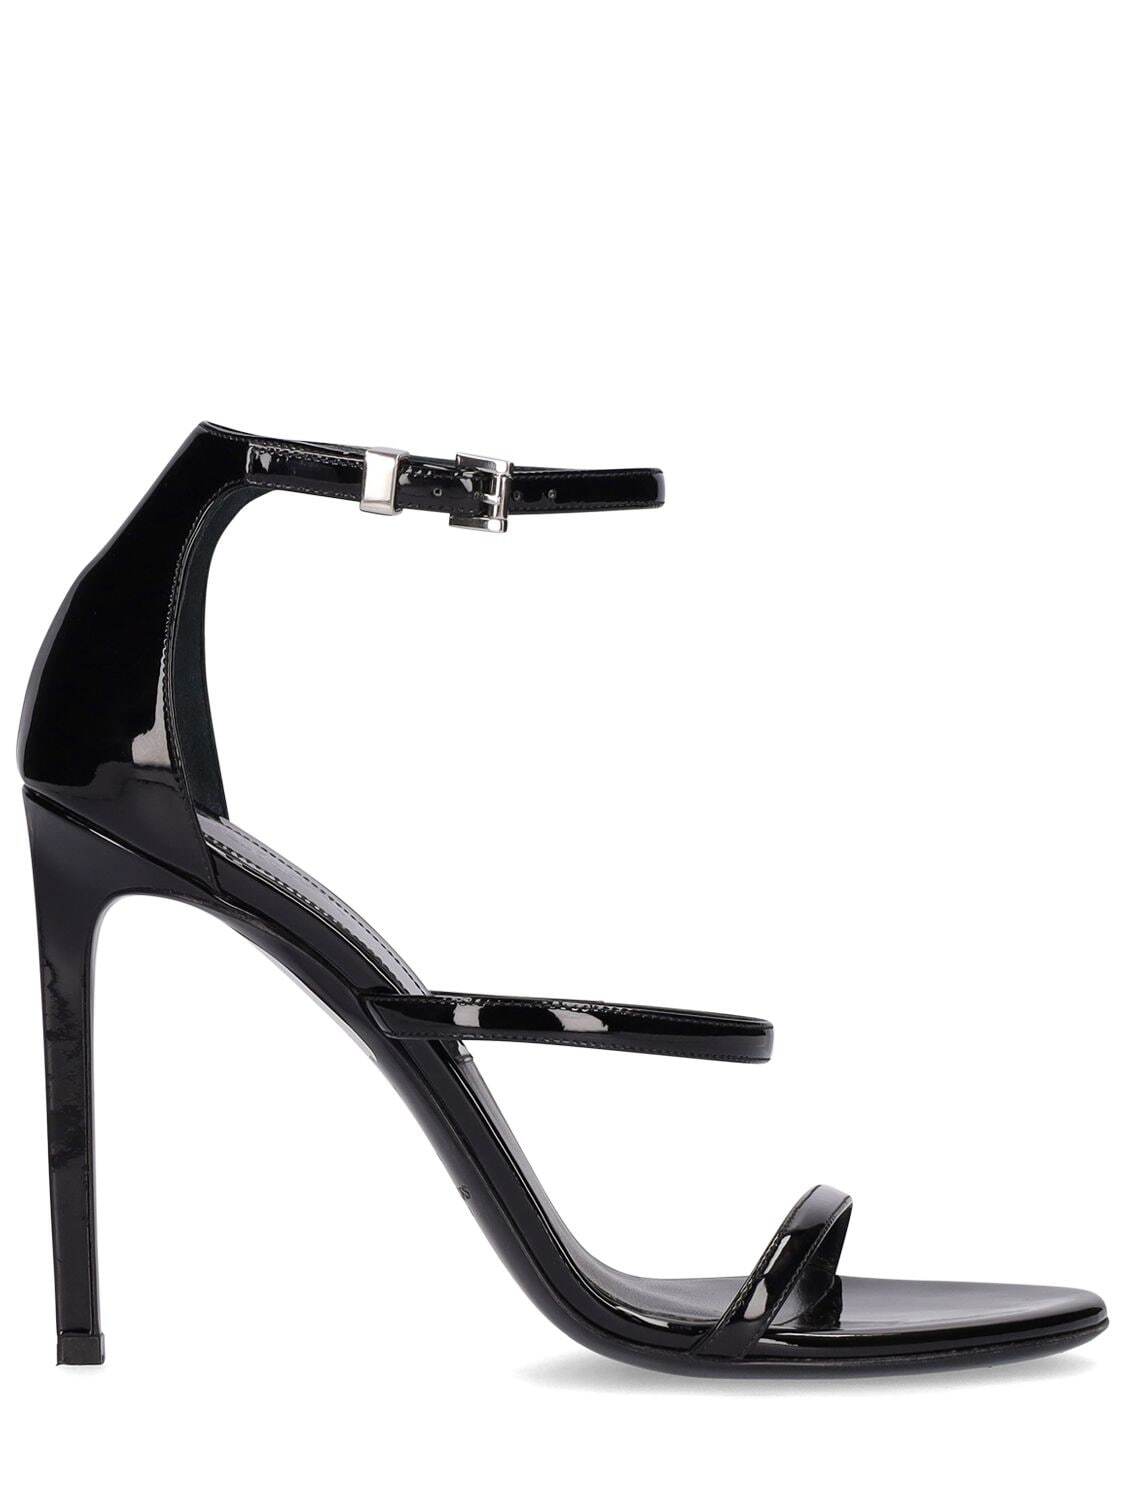 MICHAEL KORS COLLECTION 100mm Nadege Patent Leather Sandals in black